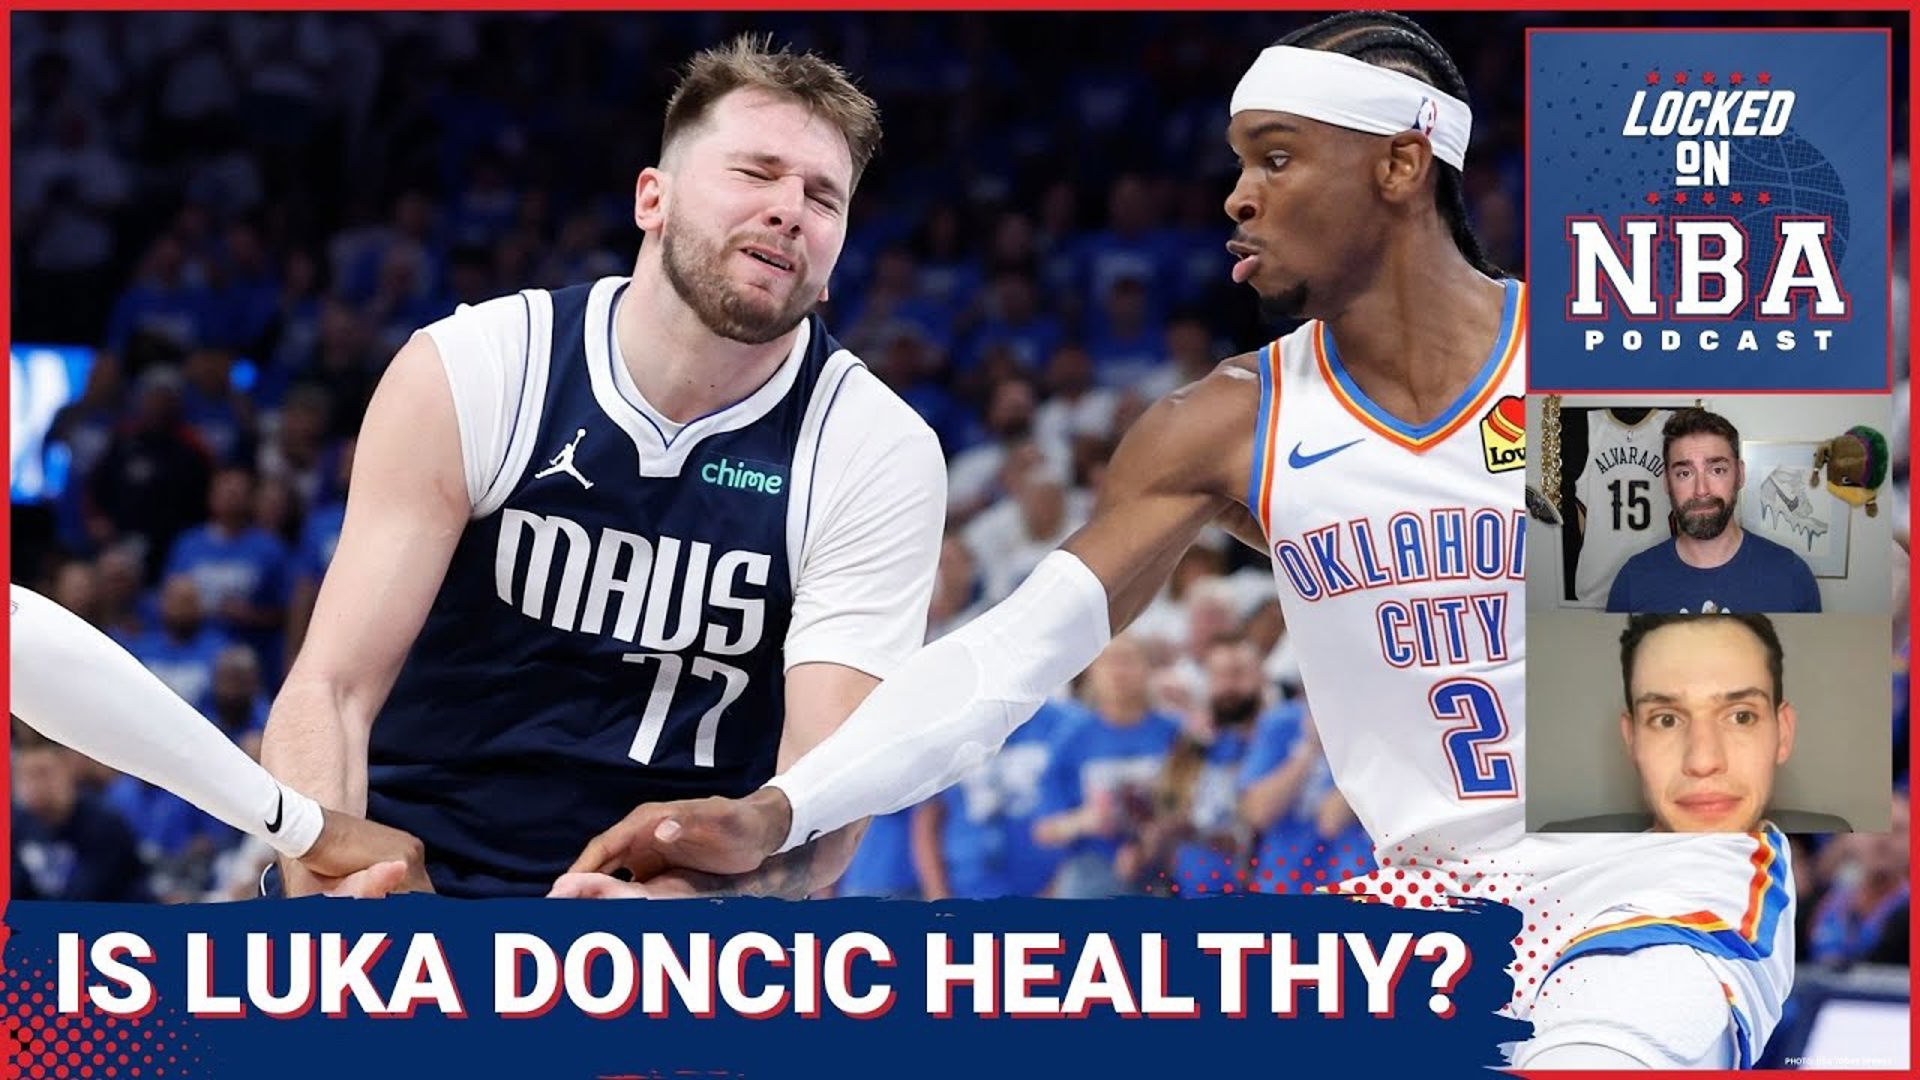 Shai Gilgeous-Alexander and the Oklahoma City Thunder beat the Dallas Mavericks in Game 1 of their playoff series but how injured is Luka Doncic?